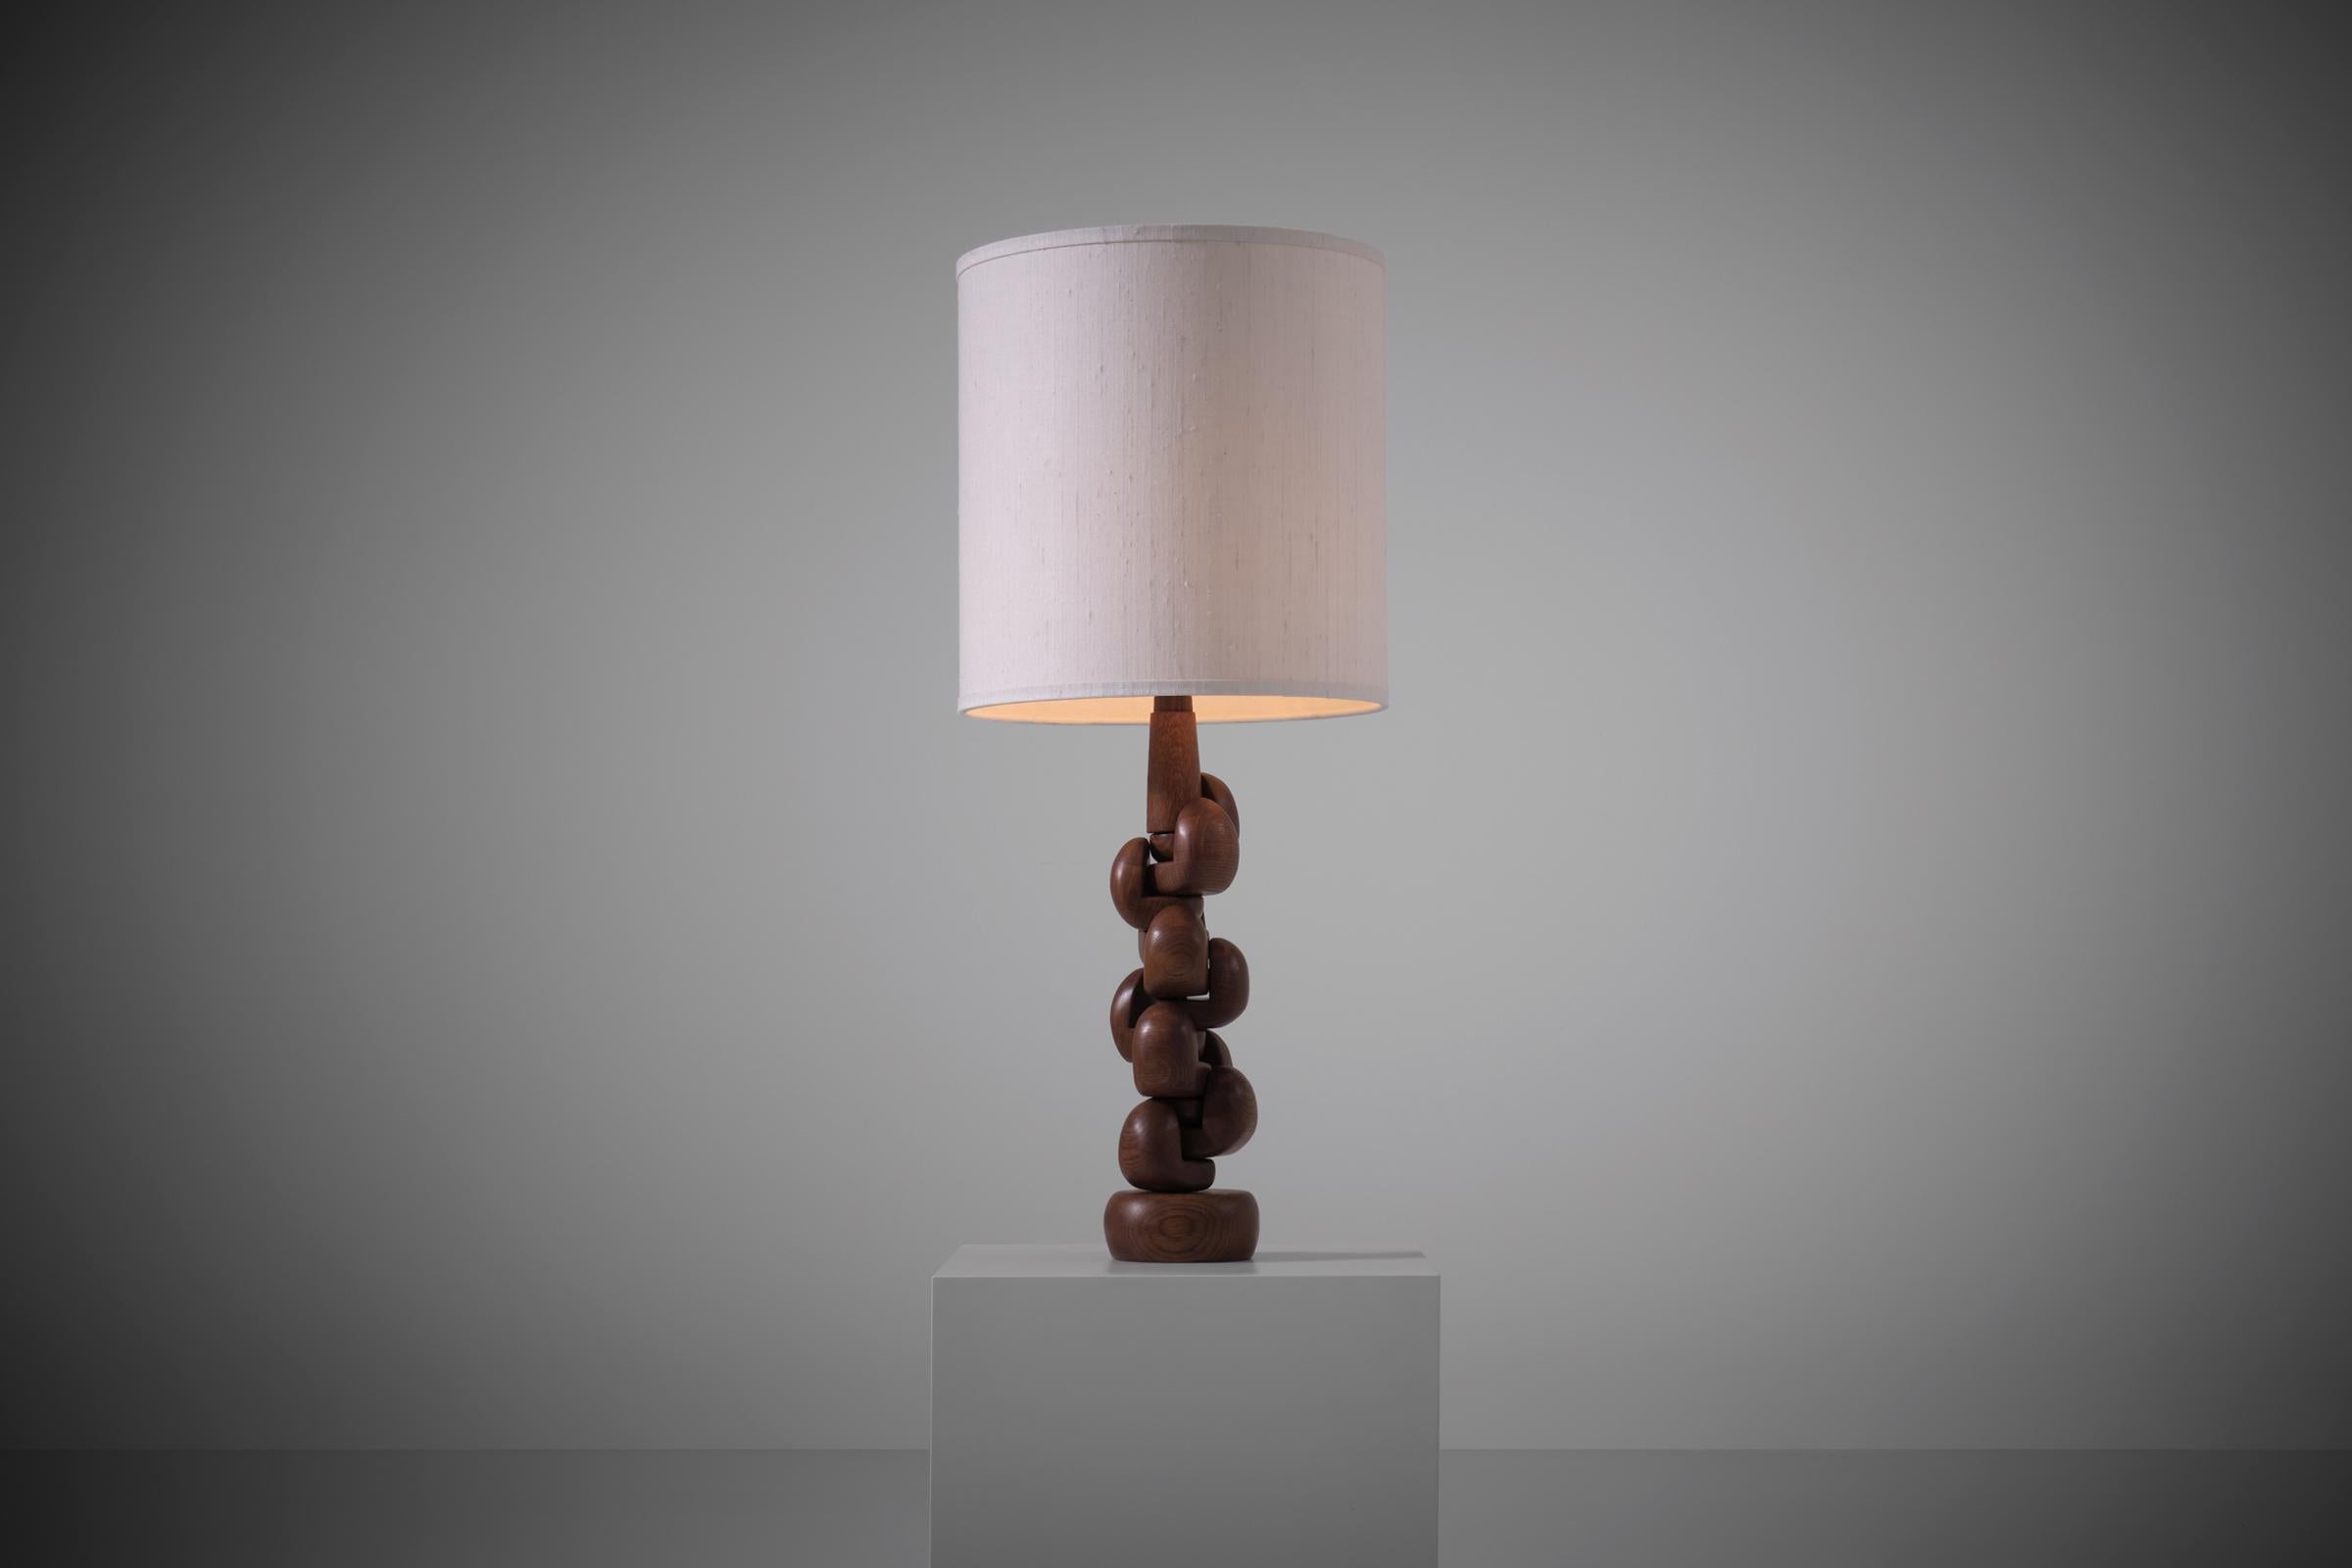 Sculptural Oak wooden Table Lamp, France 1960s. Intriguing sculptural design composed of several interlocking organic elbow shaped wooden parts. The parts are made from beautiful solid Oak with a nice exposed woodgrain, the parts can be moved around